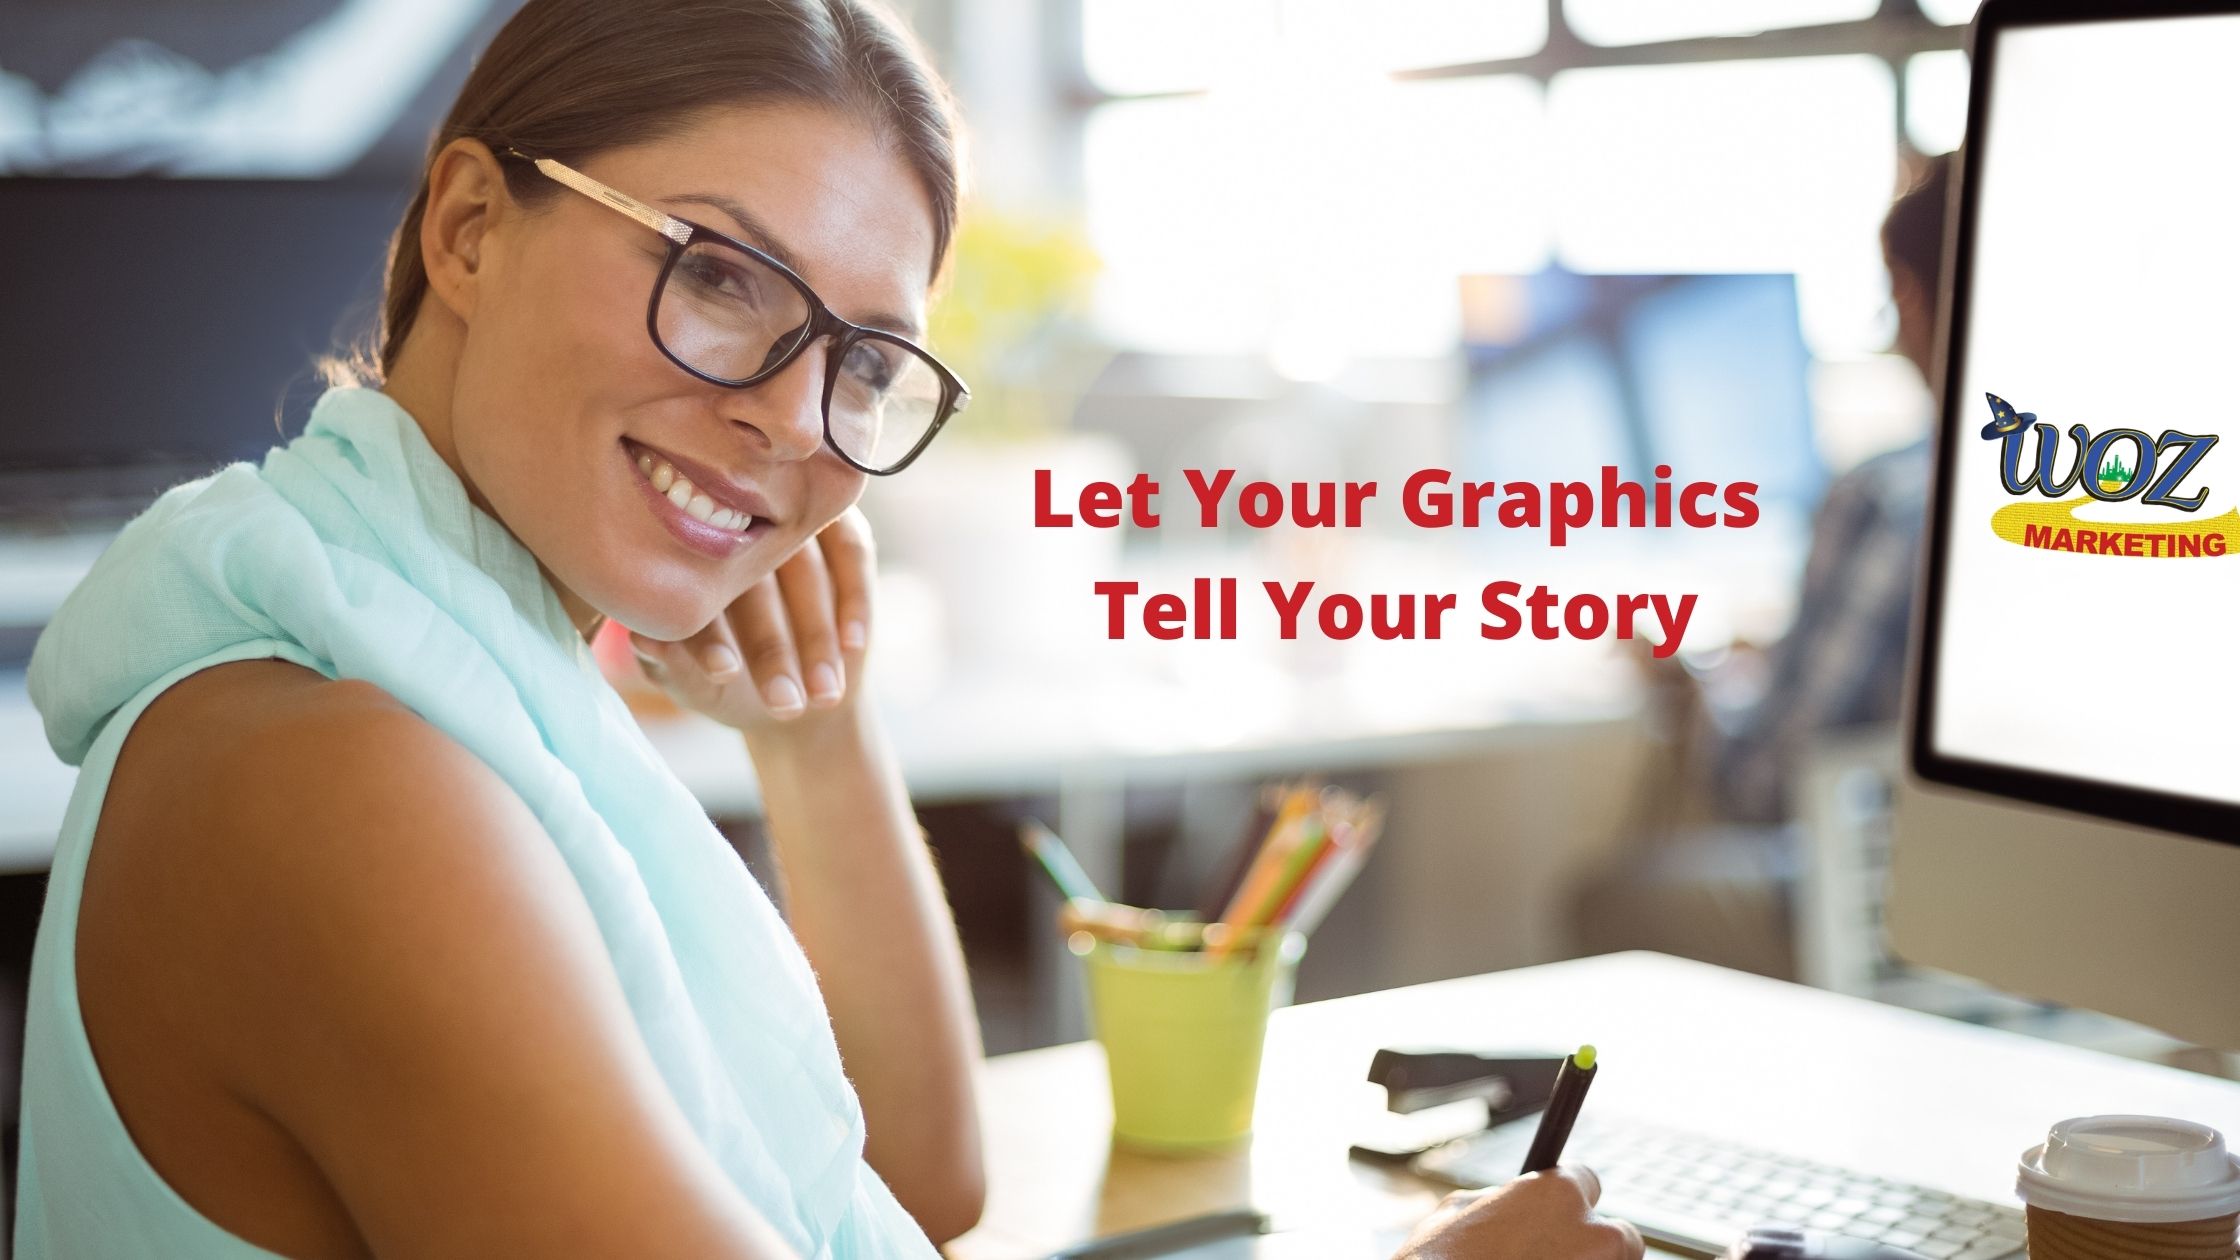 Let Your Graphics Tell Your Story